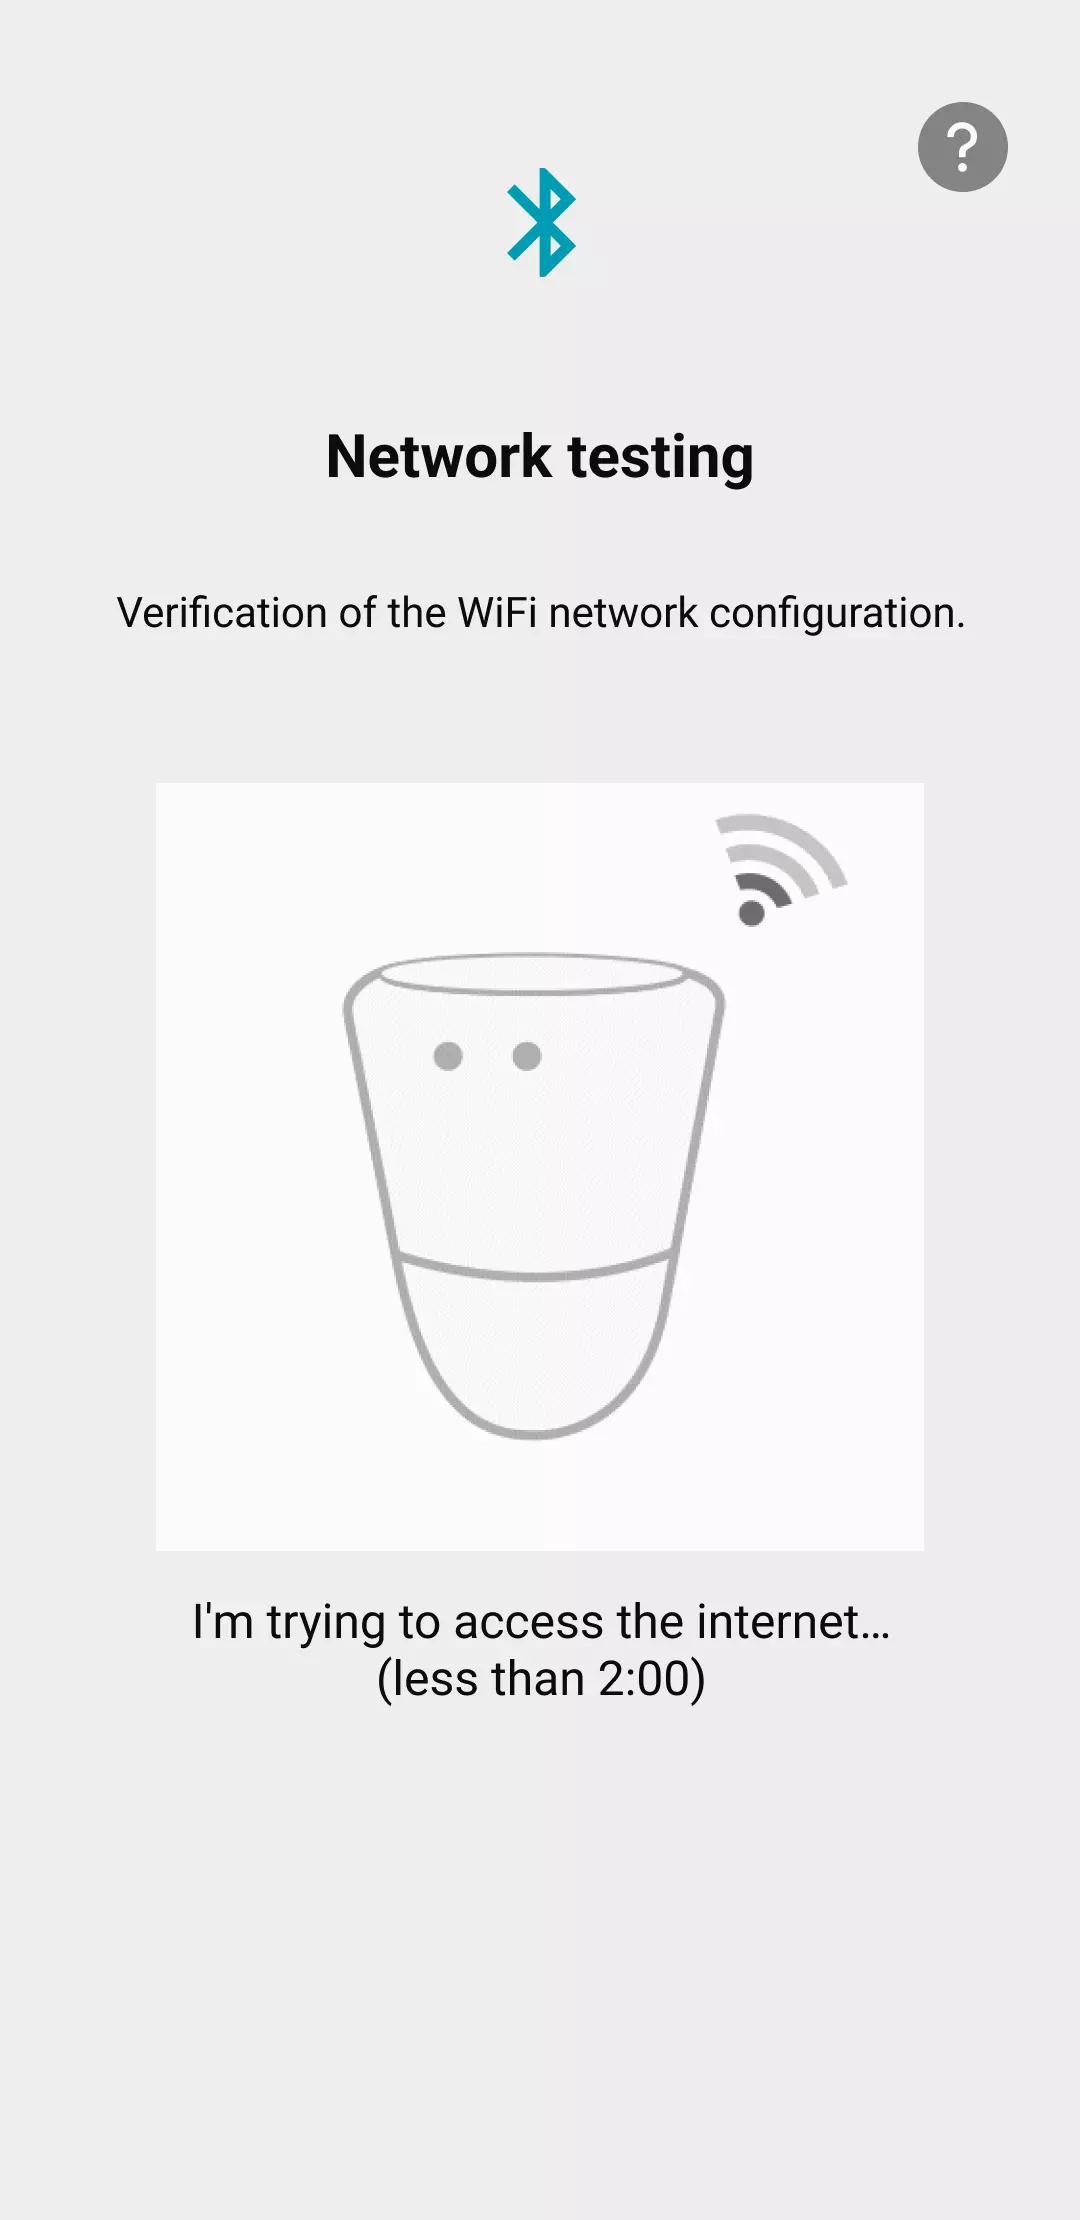 Visual of the application showing the ico wifi network configuration check page